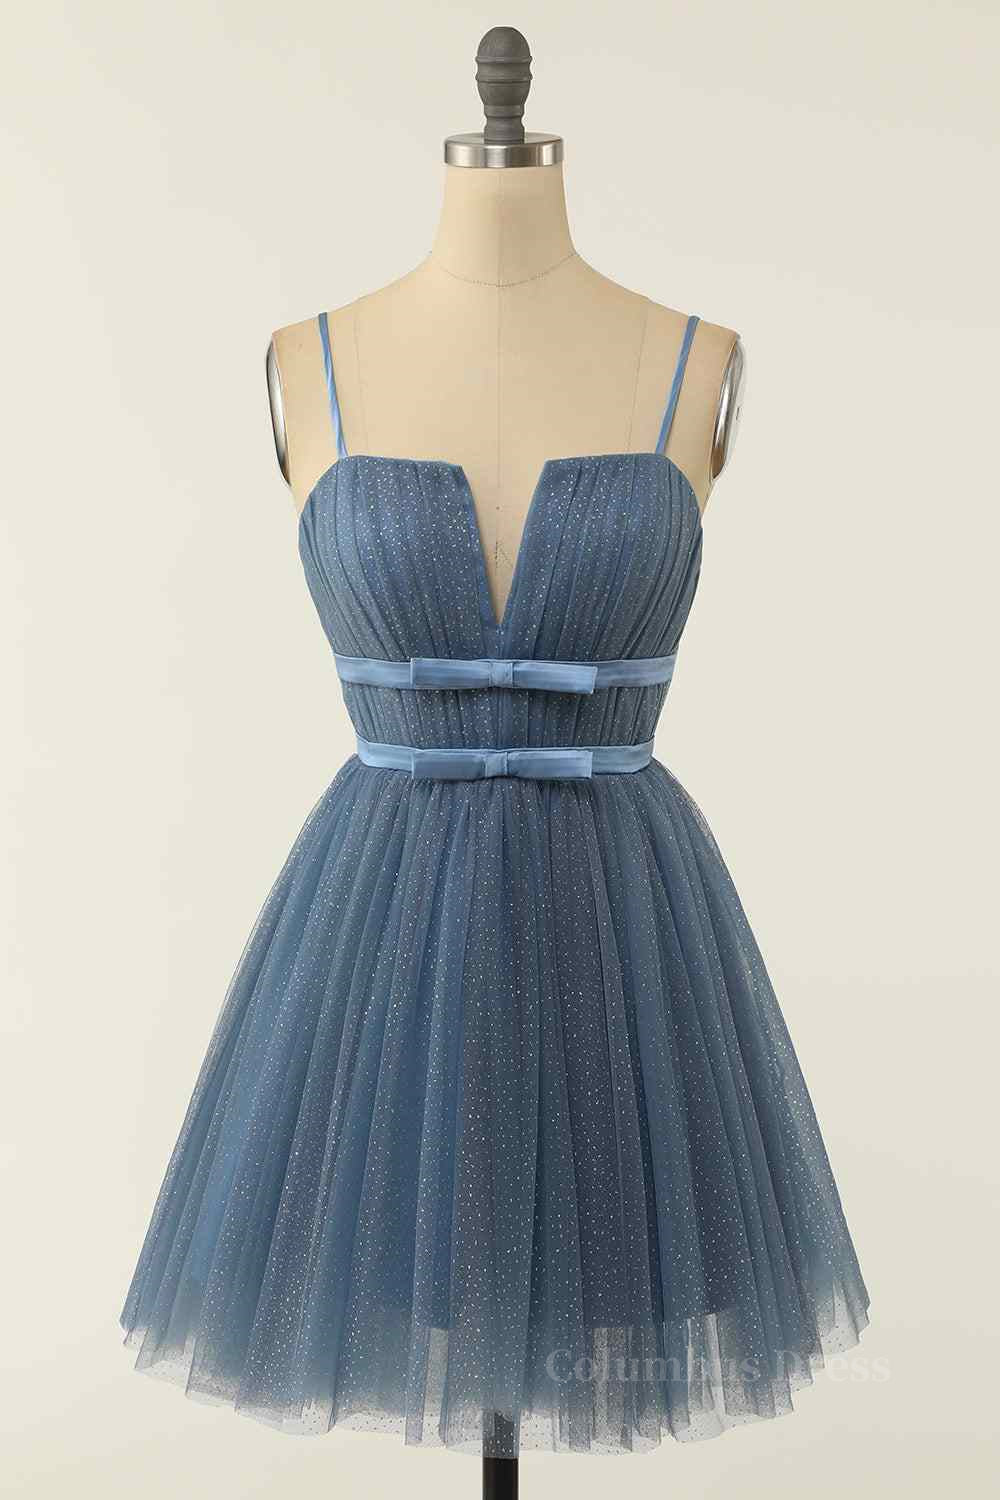 Design Dress Casual, Dusty Blue A-line V Neck Pleated Double Bow Tie Sash Mini Homecoming Dress